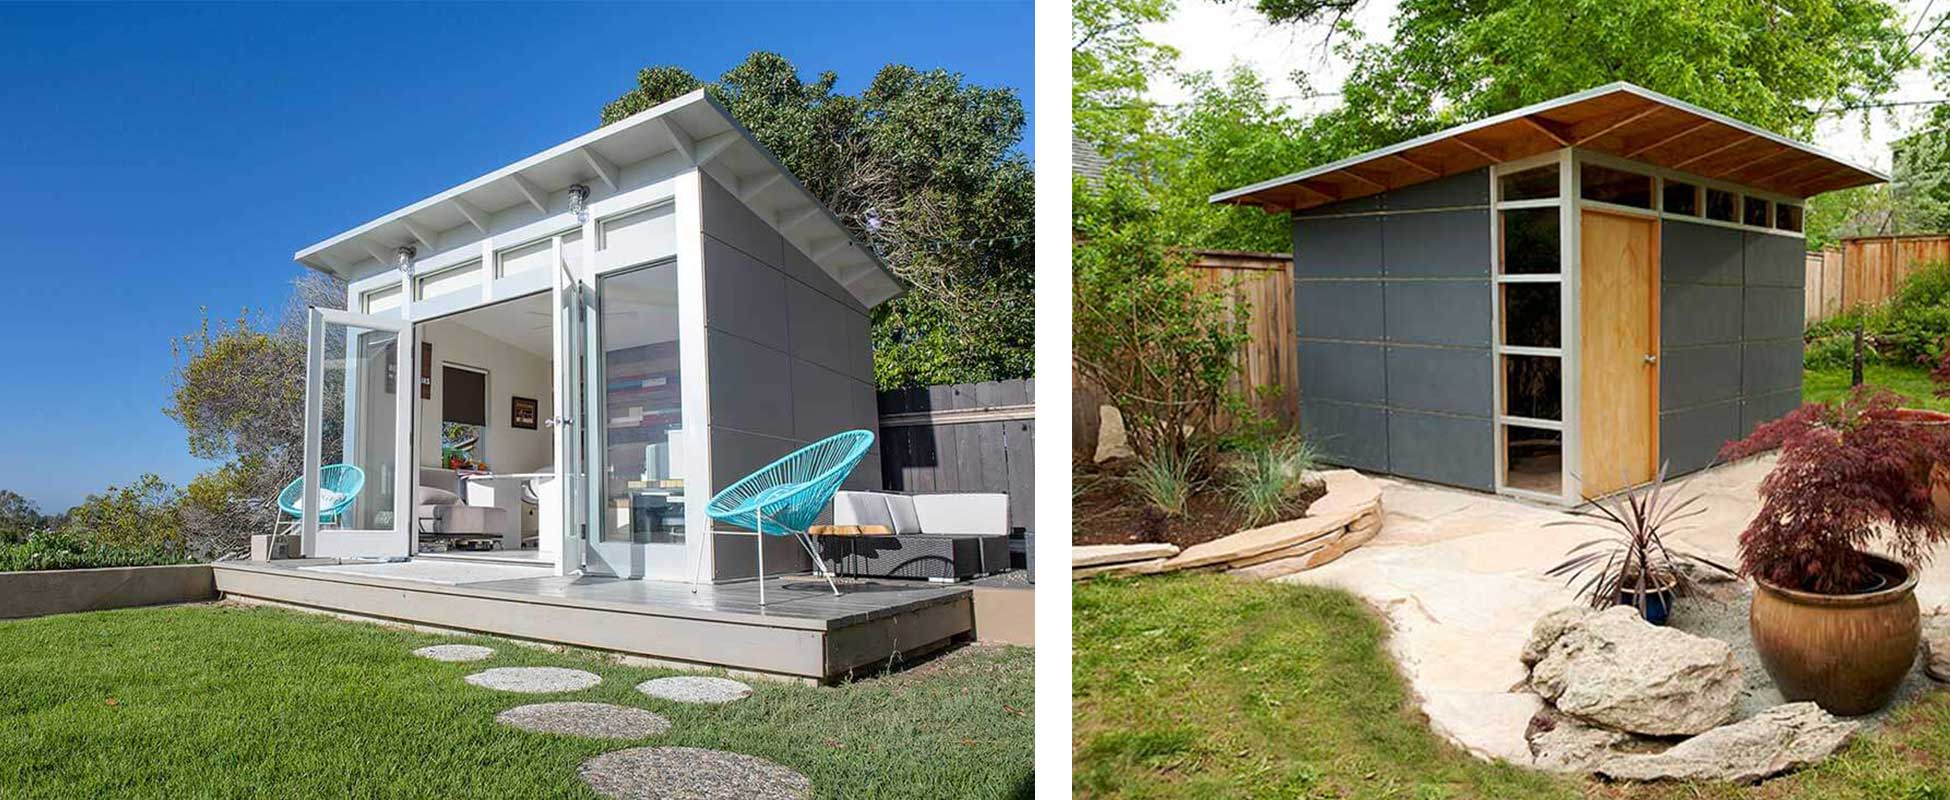 A modern, prefab Studio Shed complete with artwork, windows and furniture.